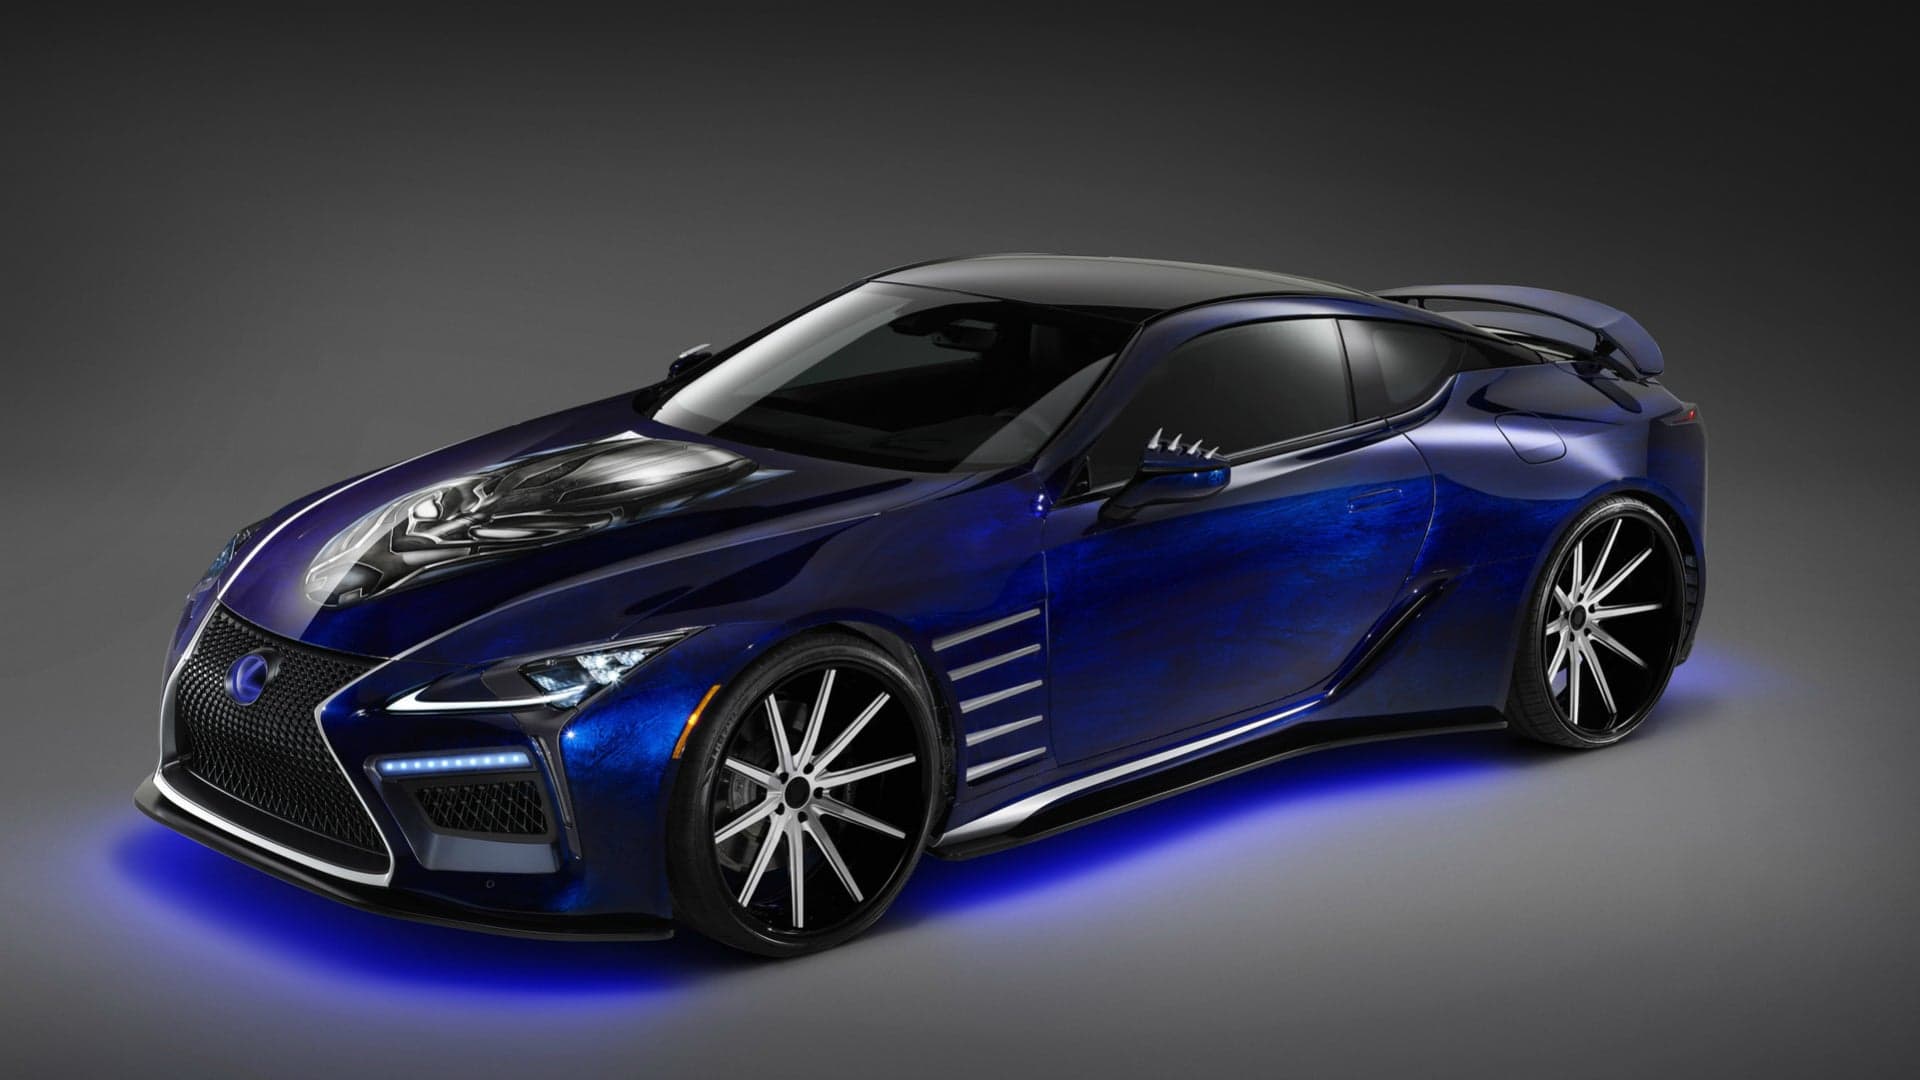 Lexus Brings Two “Black Panther”-Inspired Cars to SEMA